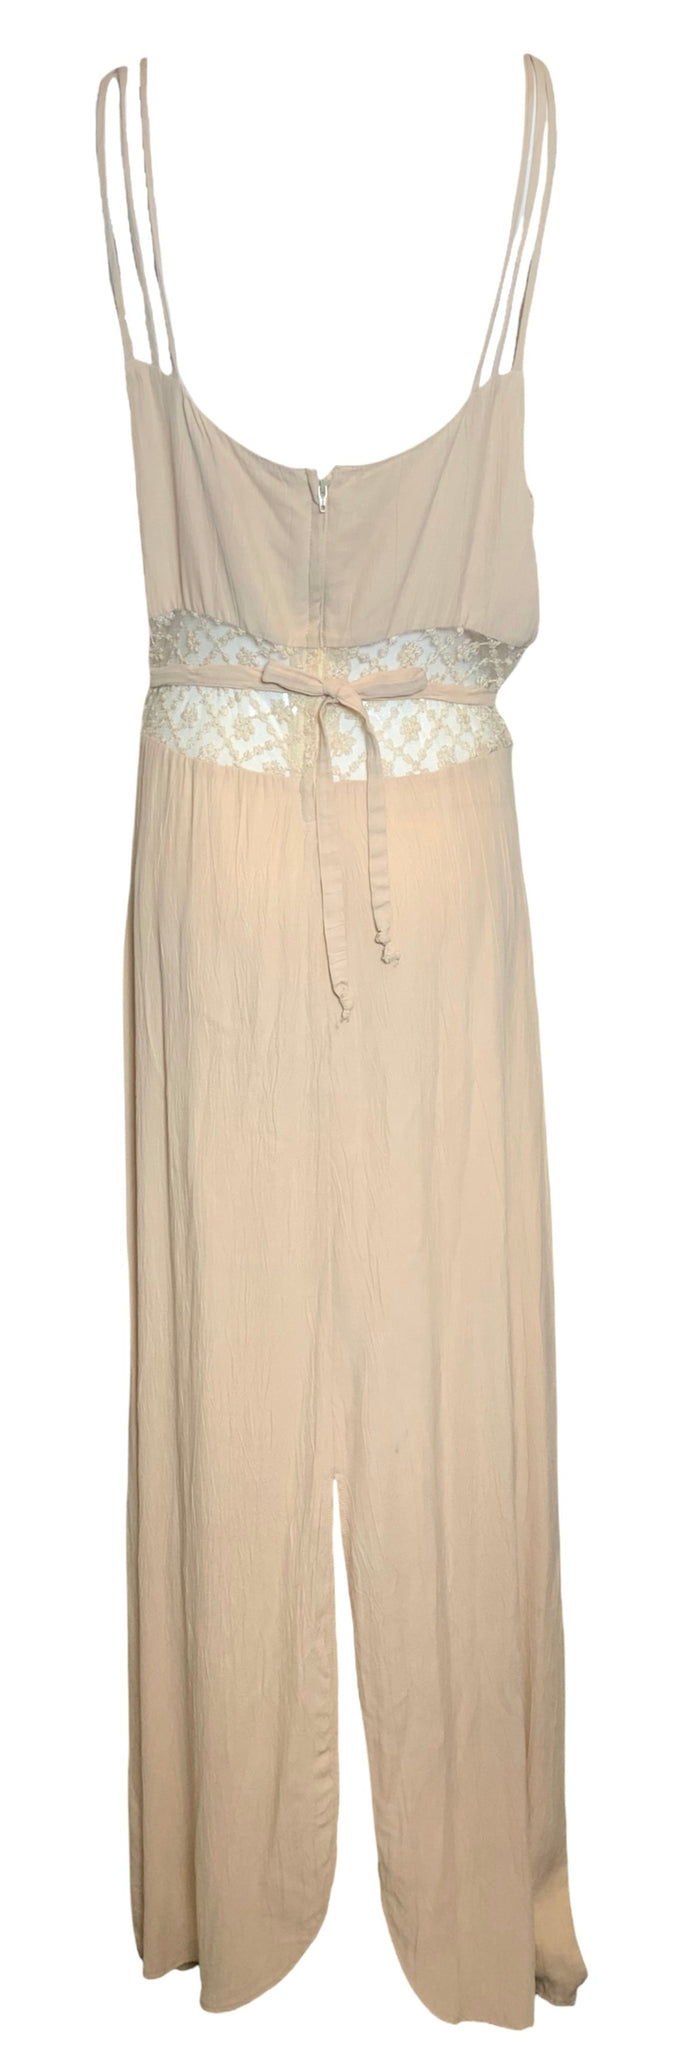 Nude Crinkled Crepe Full Length Slip Dress w Lace Cut Out Detail, back